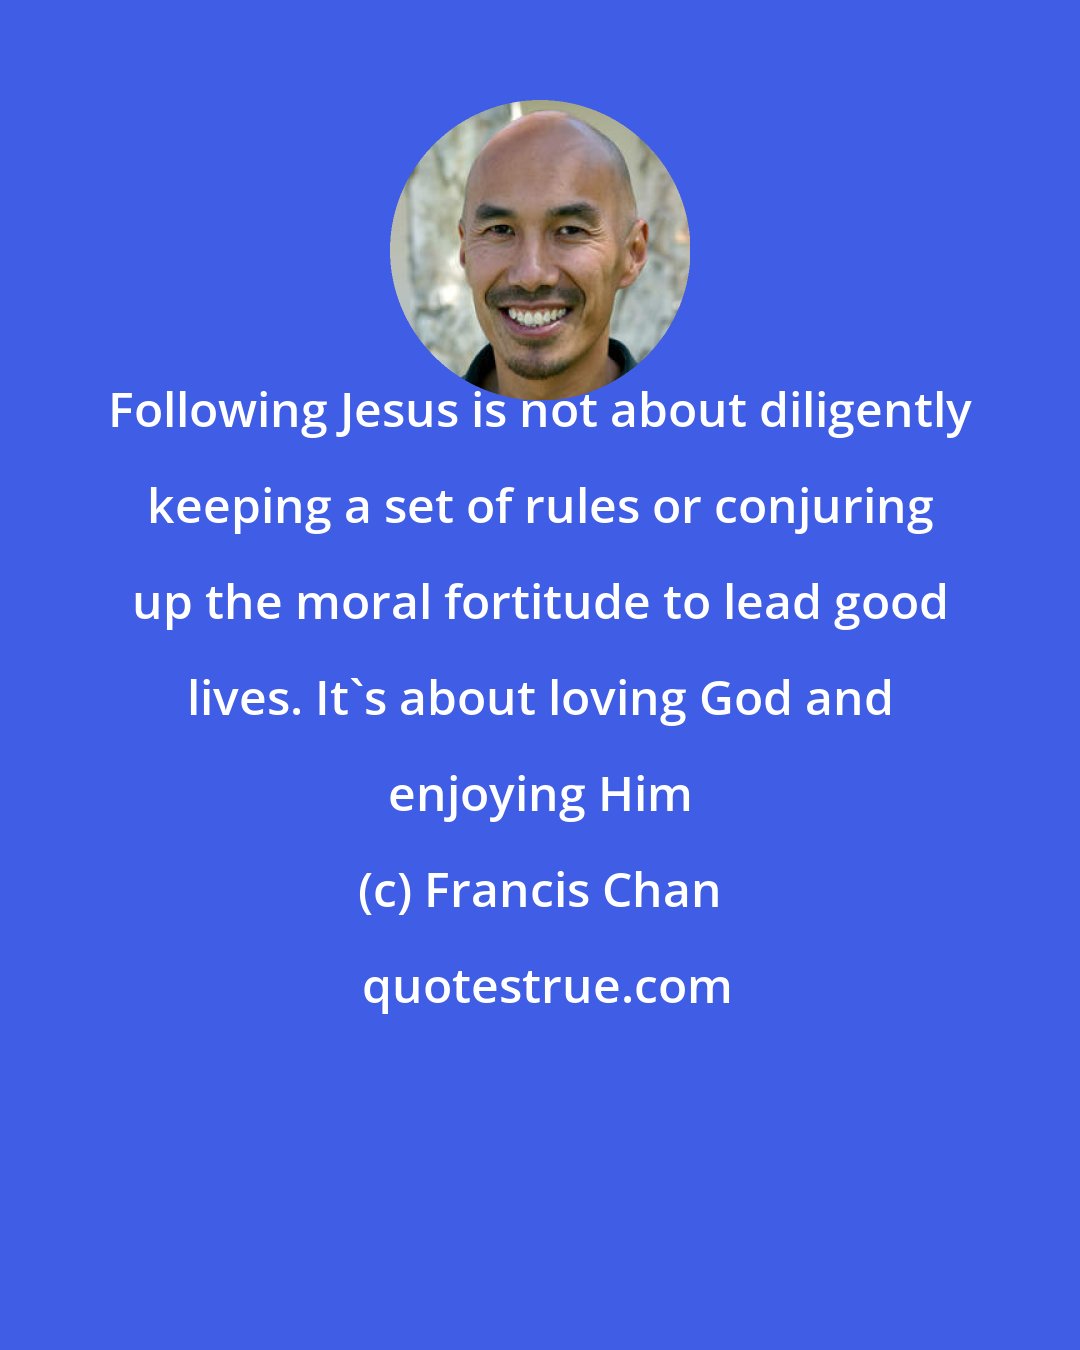 Francis Chan: Following Jesus is not about diligently keeping a set of rules or conjuring up the moral fortitude to lead good lives. It's about loving God and enjoying Him